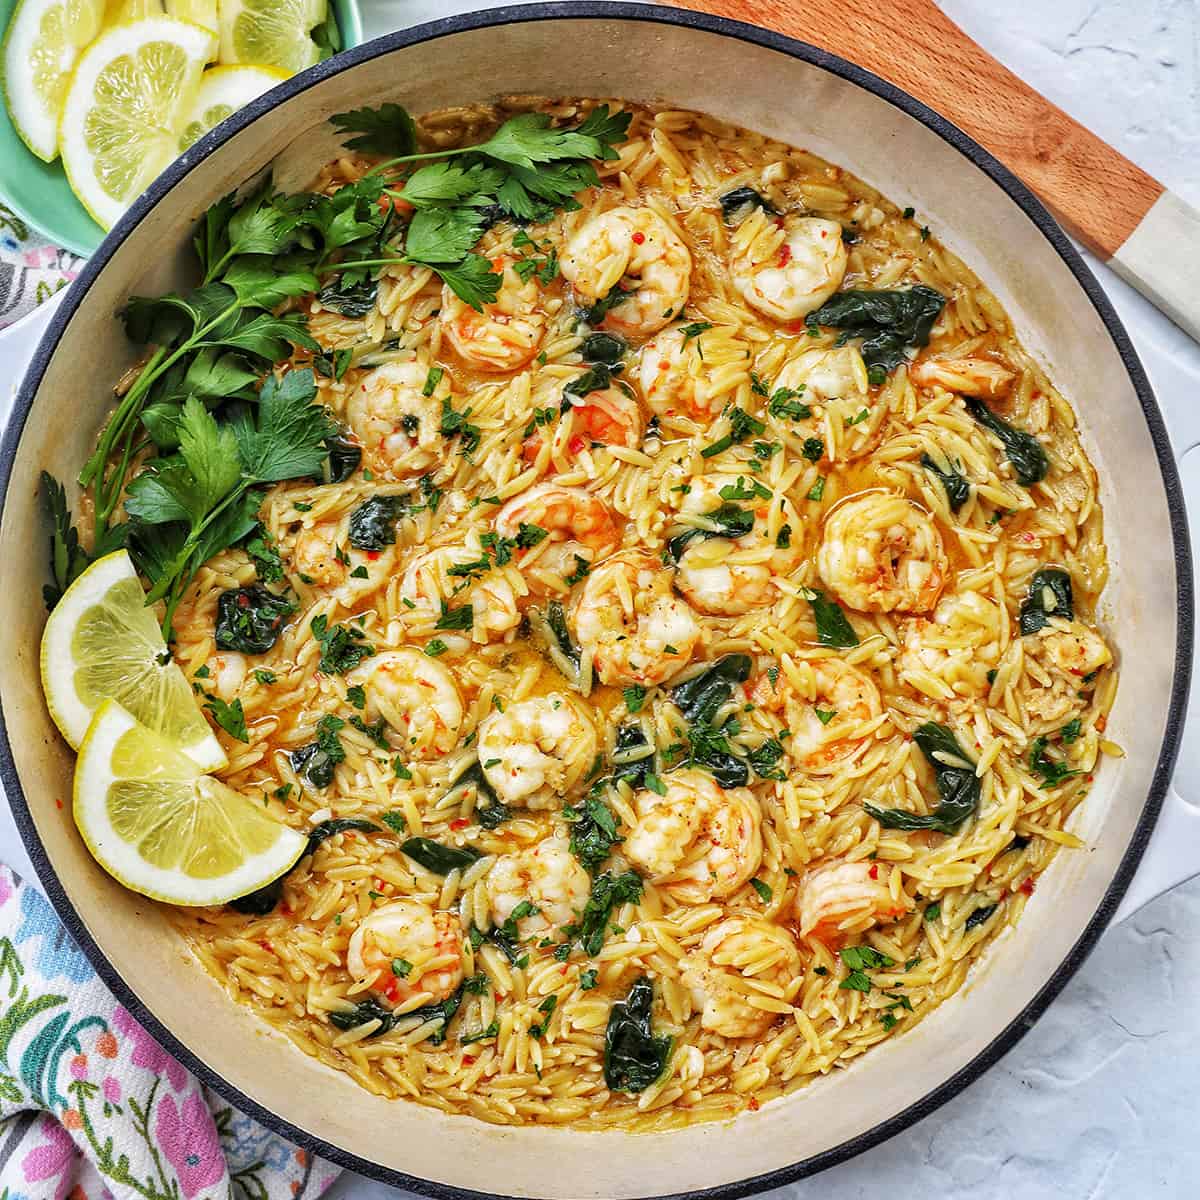 Skillet with shrimp scampi and orzo, lemons, and parsley.